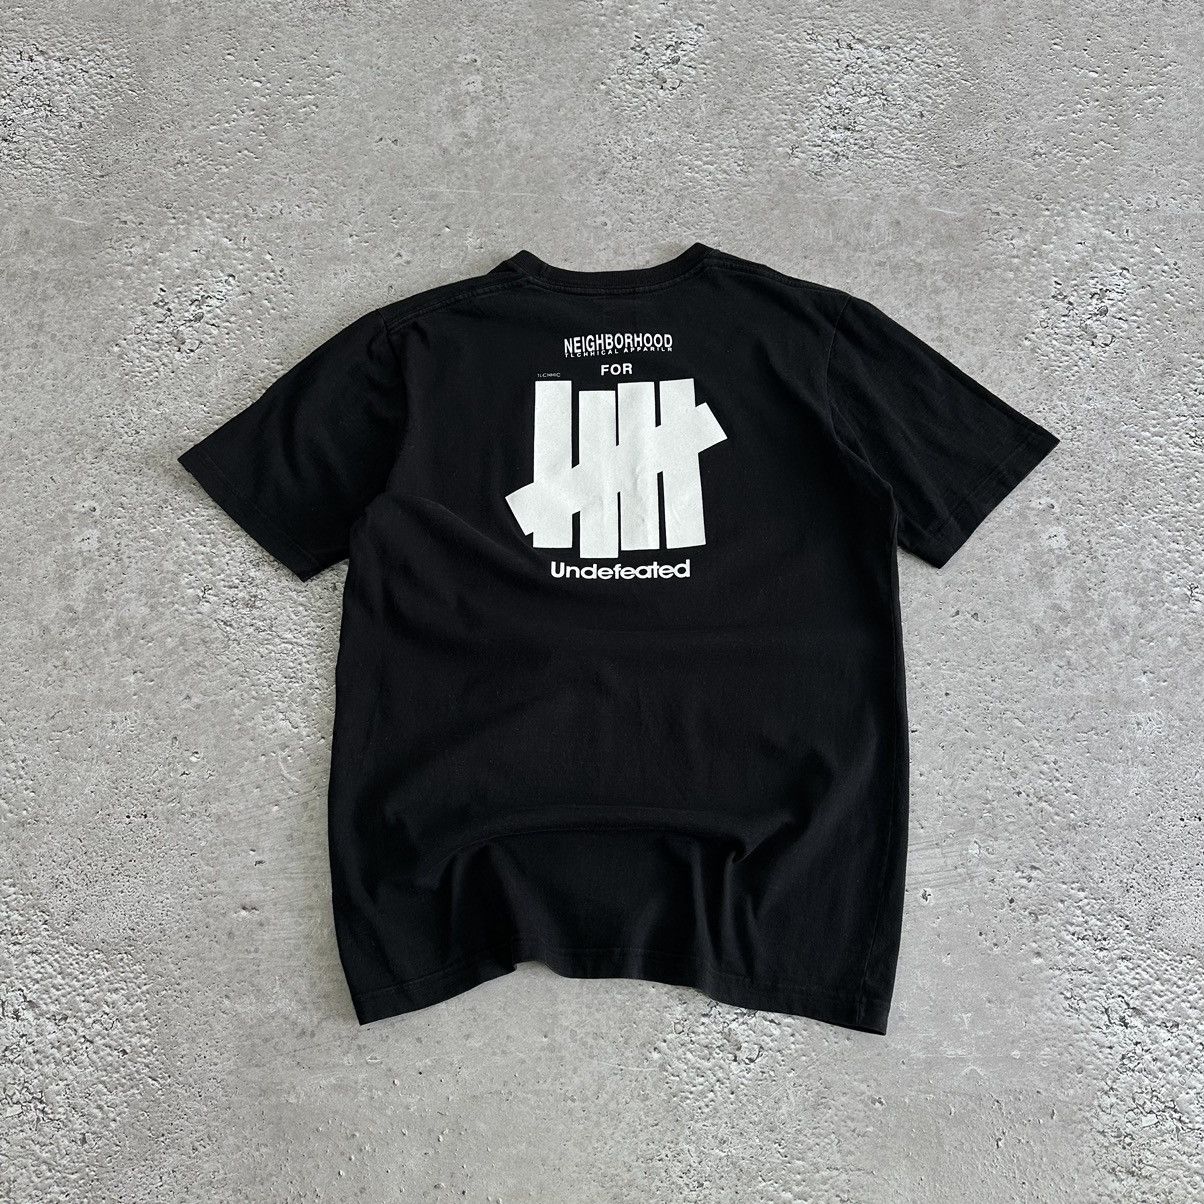 Undefeated UNDEFEATED x NEIGHBORHOOD “Joint Force” Logo T Shirt | Grailed